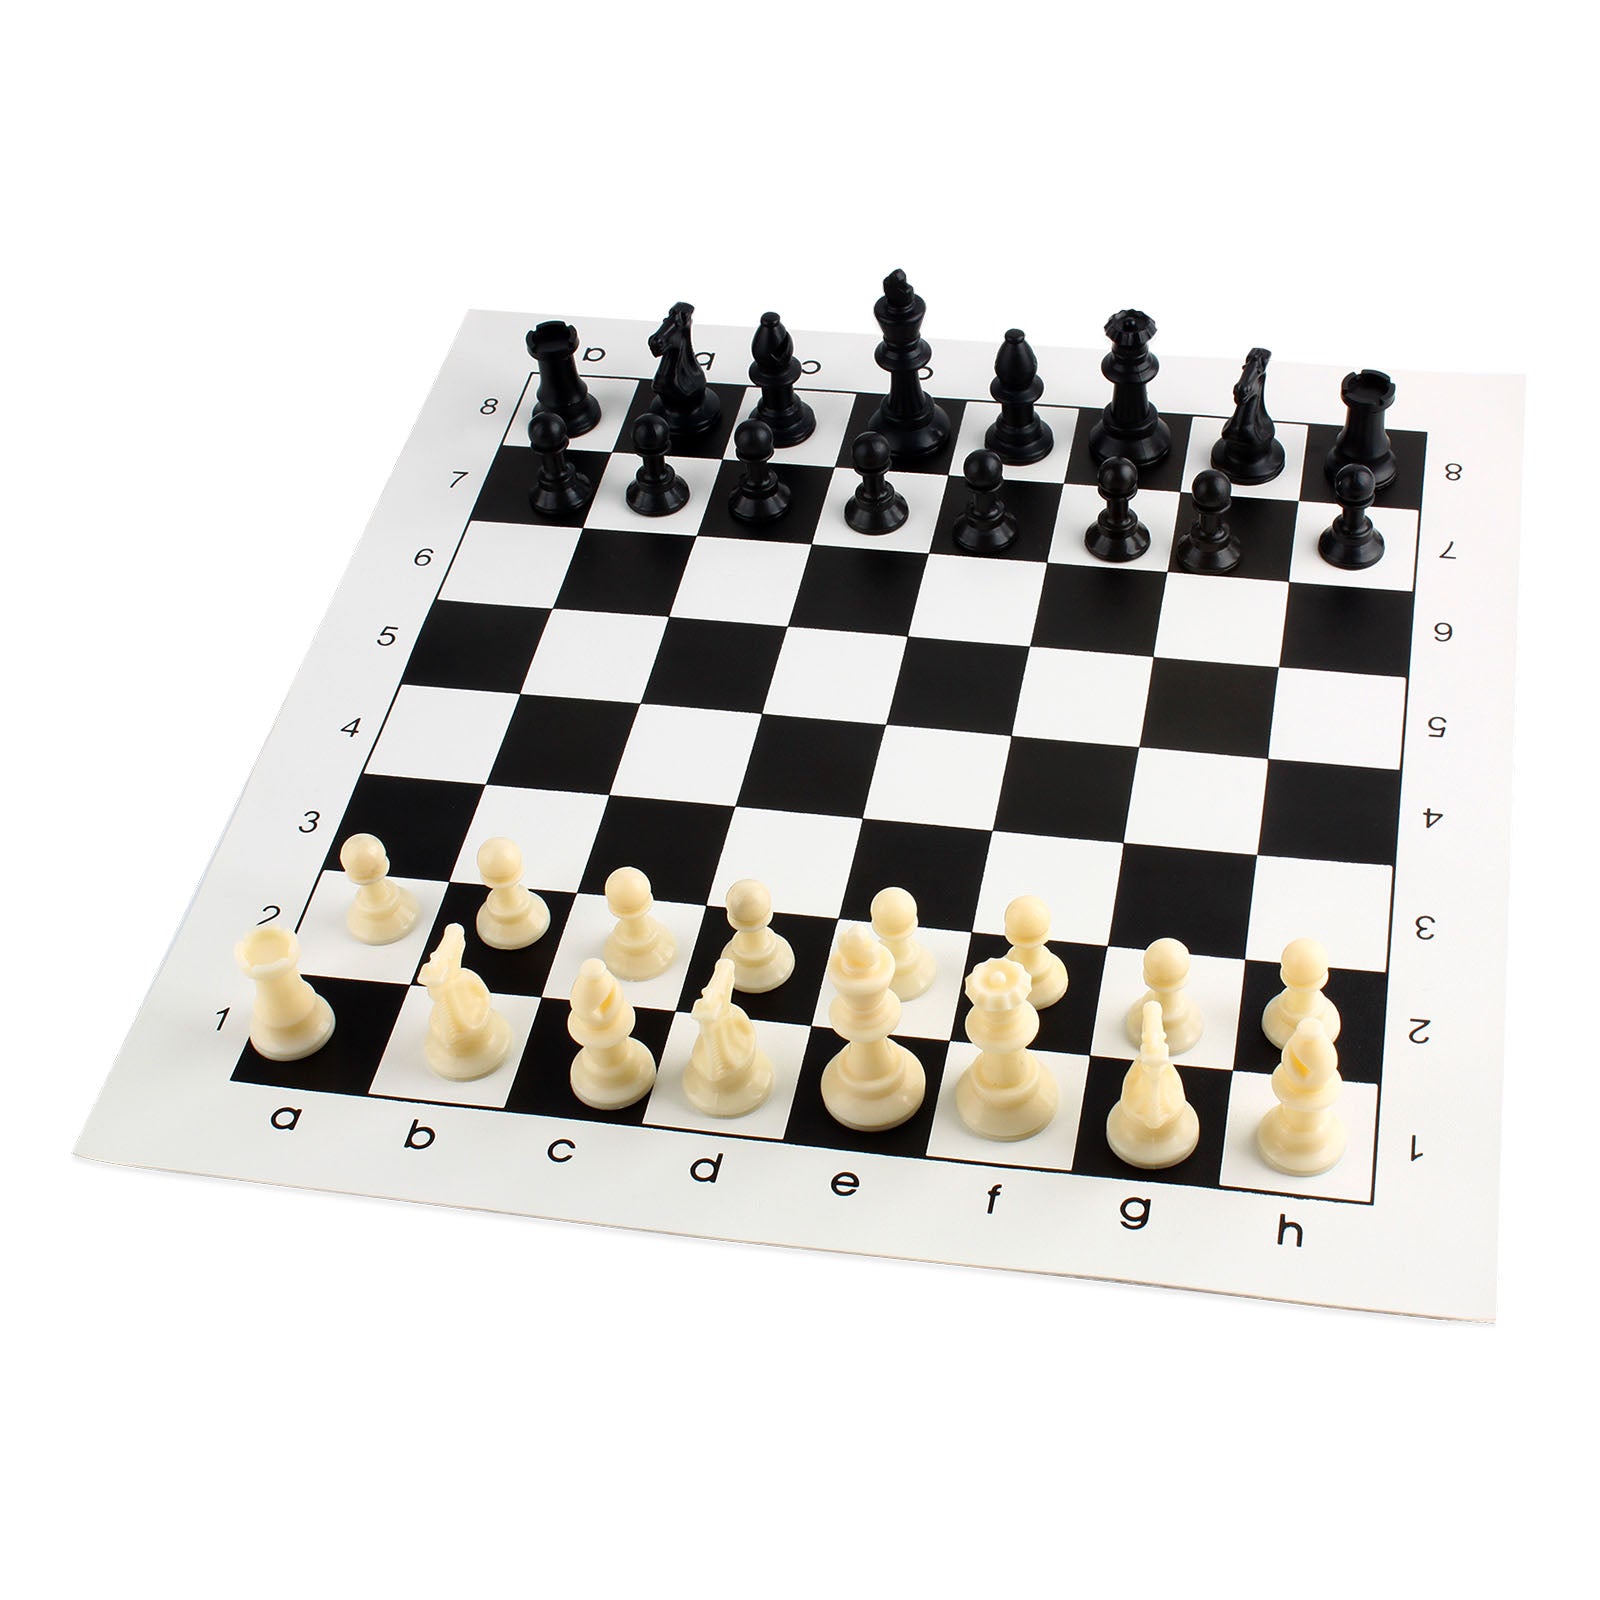 Andux Chess Game Set Chess Pieces and Rollable Board QPXQ-01 (Black ...